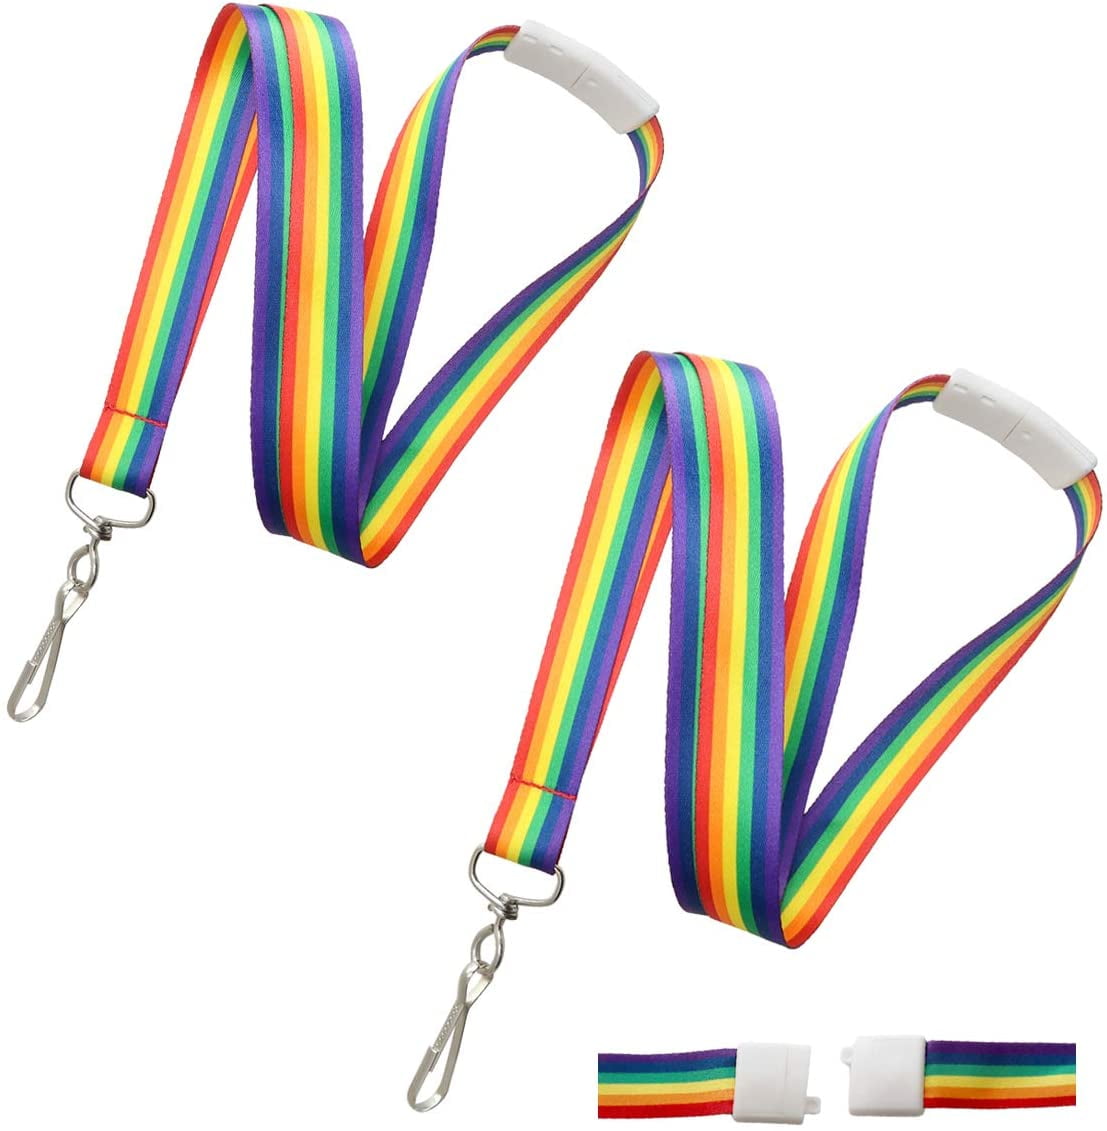 100 x Rainbow Pride Medal Ribbons Lanyards with Gold clips 22mm wide 